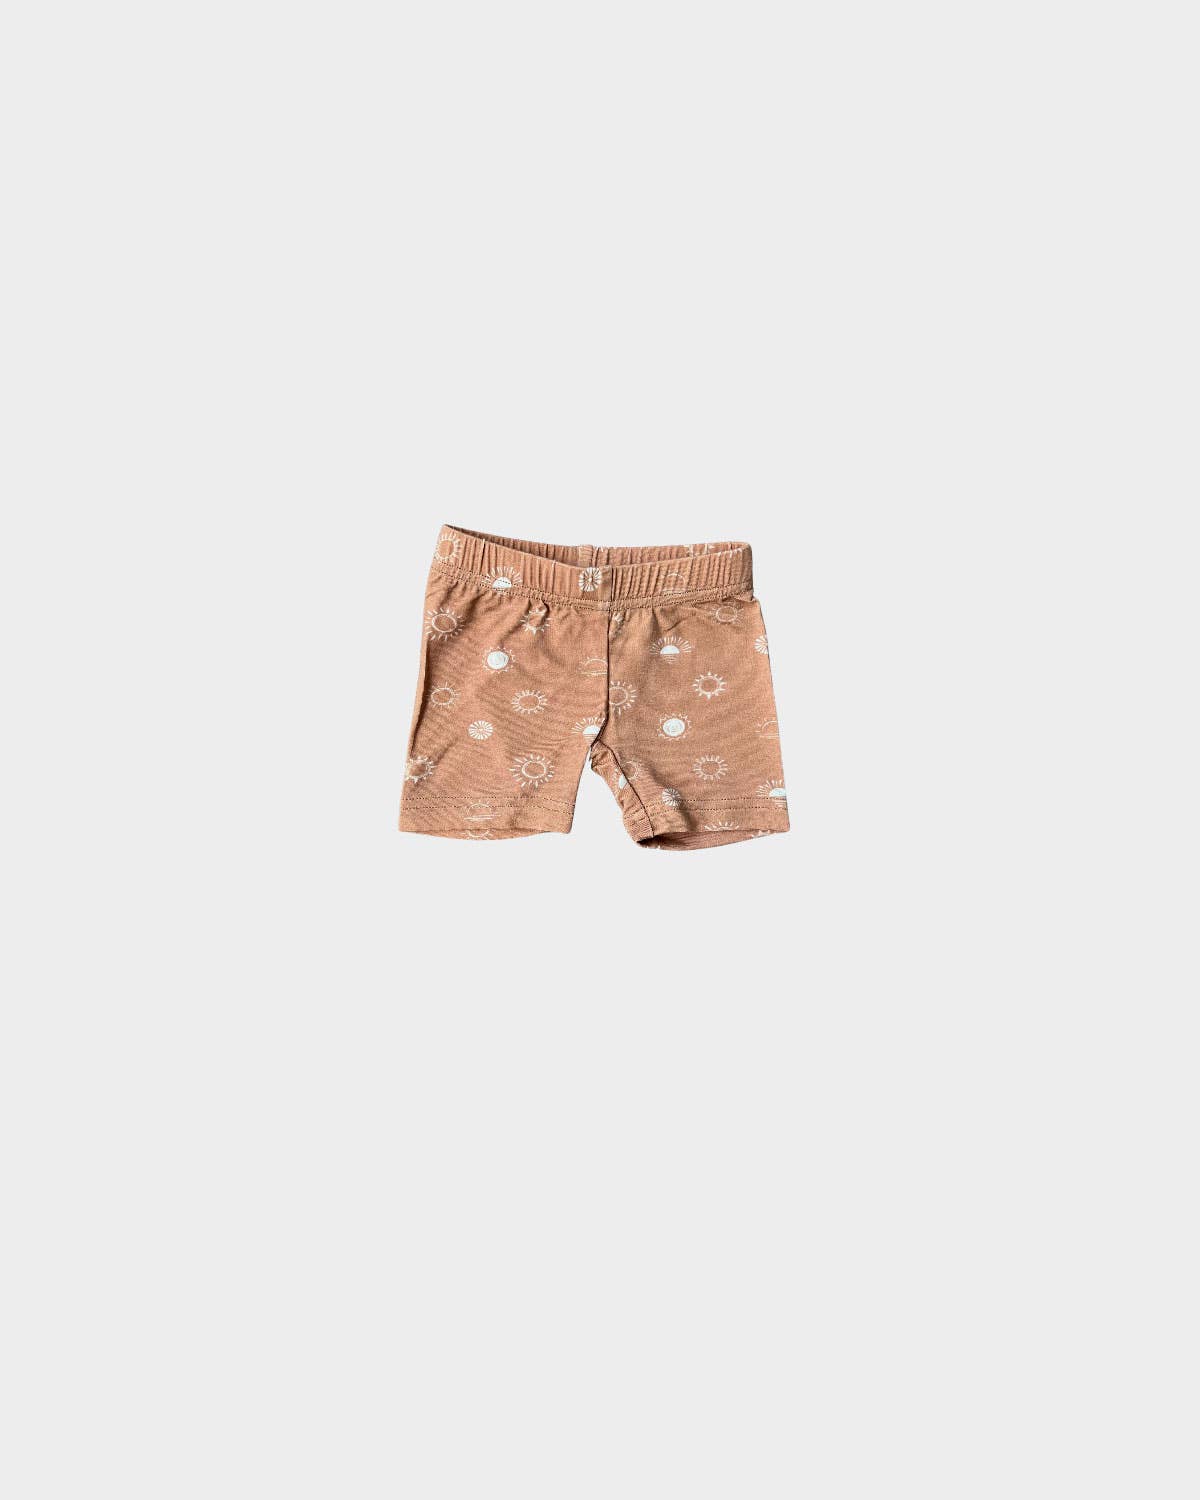 babysprouts clothing company - Sunkissed Tee & Sun Shorts Set